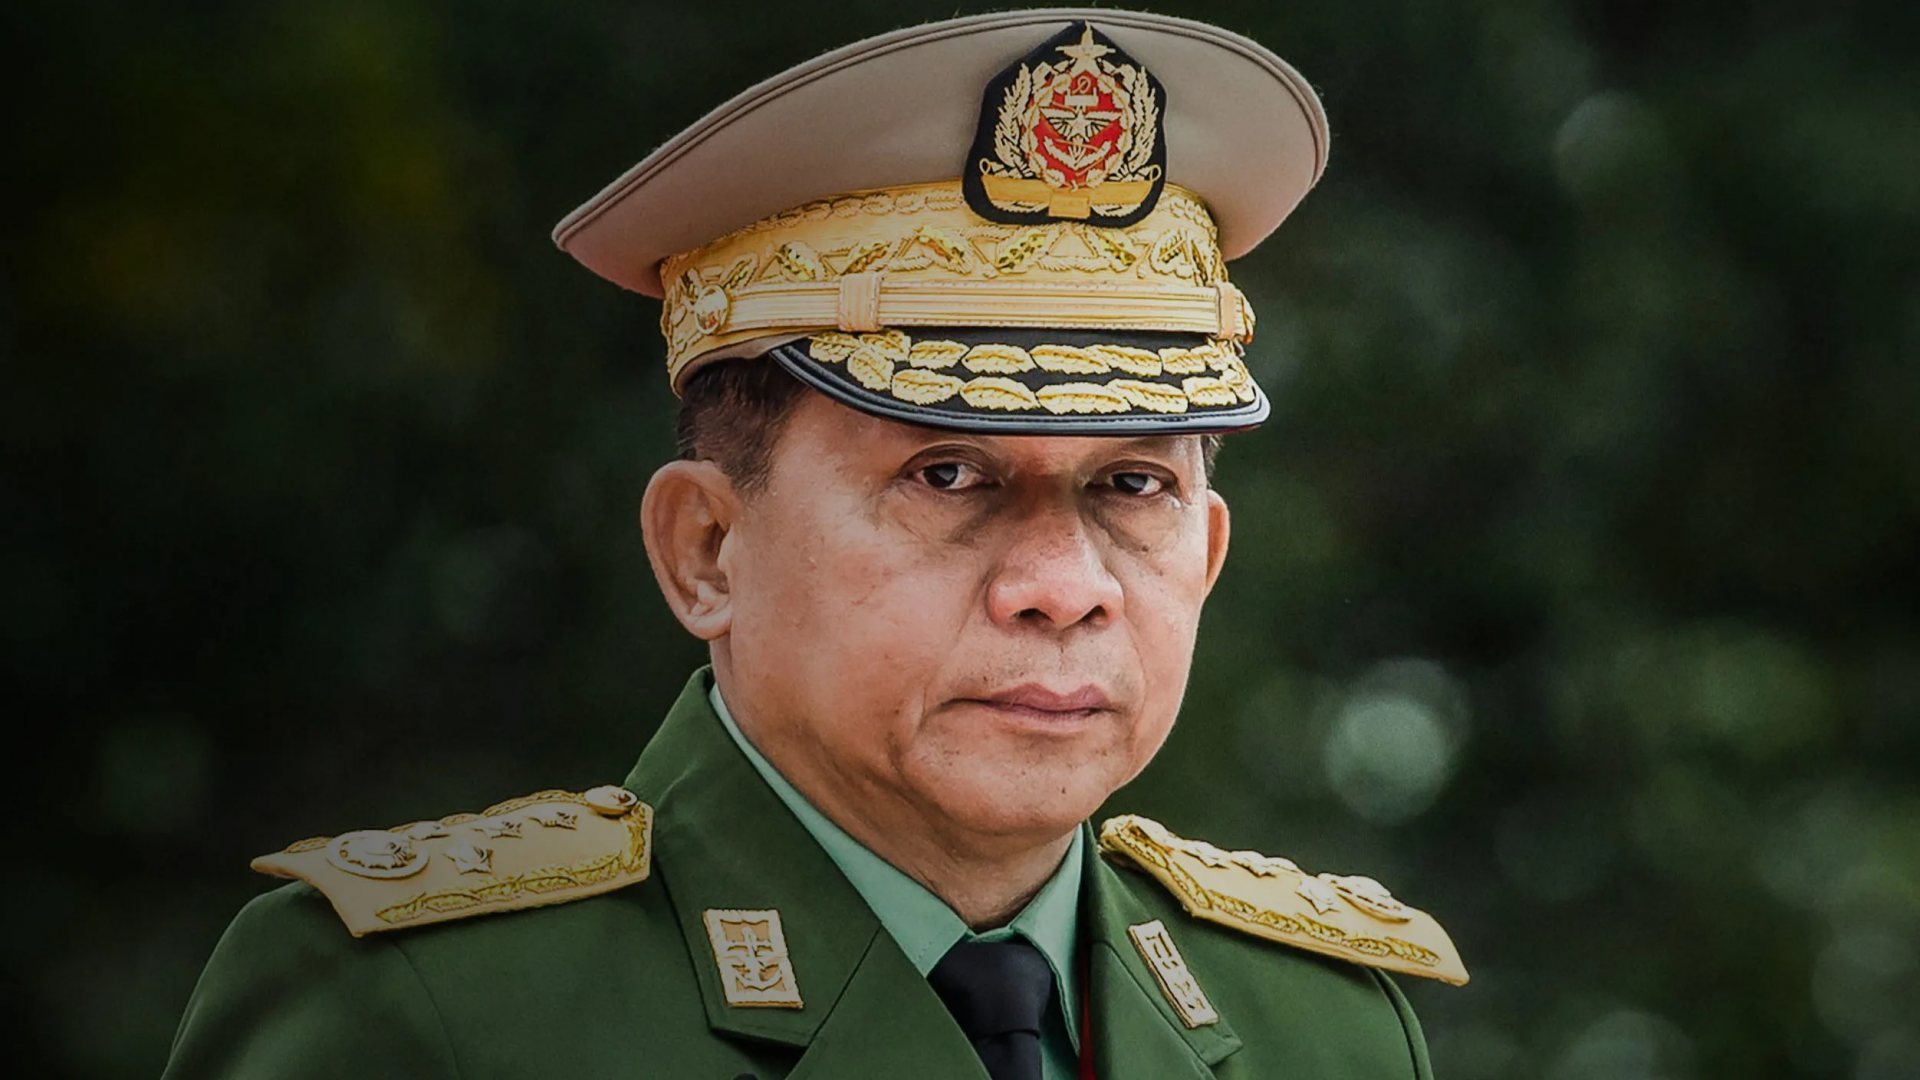 Senior General Min Aung Hlaing has taken the reins of power in Myanmar after deposing the elected government of Aung San Suu Kyi in the Southeast Asian country's latest military coup.   © APF/Jiji